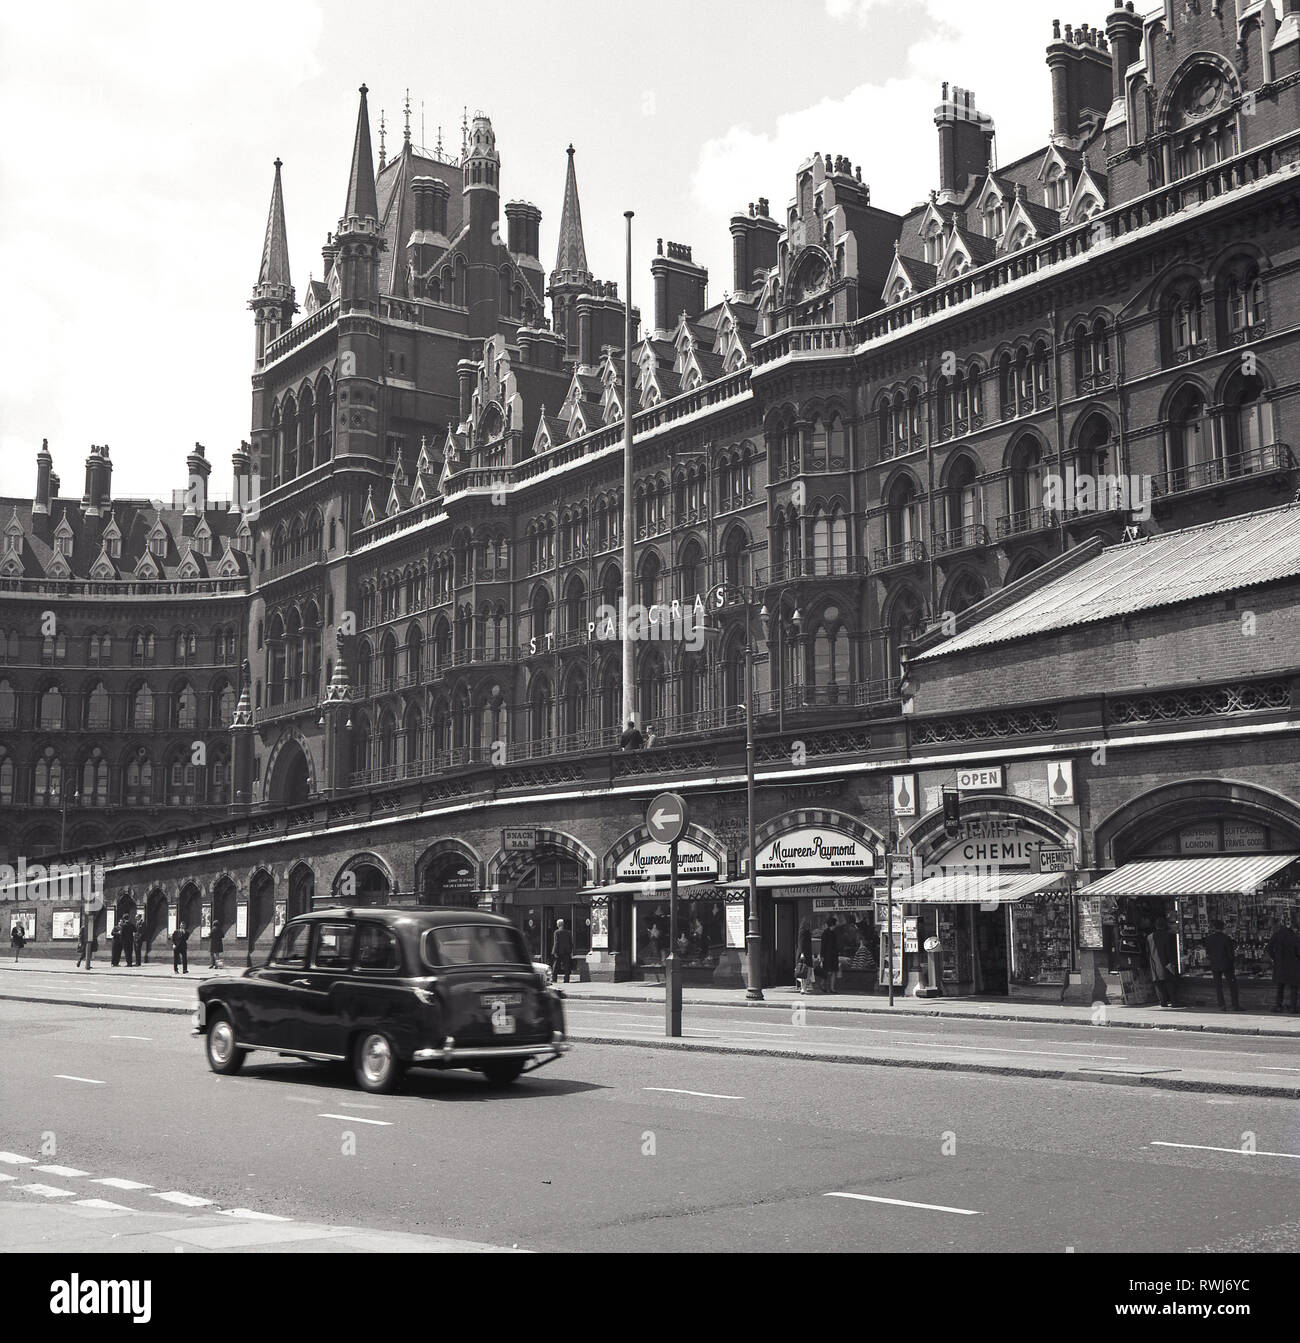 1960s, a London taxi on the Euston road going pass the Midland Grand Hotel, the frontispiece to St Pancras railway station which opened in 1868. Designed by George Gilbert Scott, the Victorian hotel opened in 1873 but closed in 1935 and was used as railway offices during this era. Stock Photo